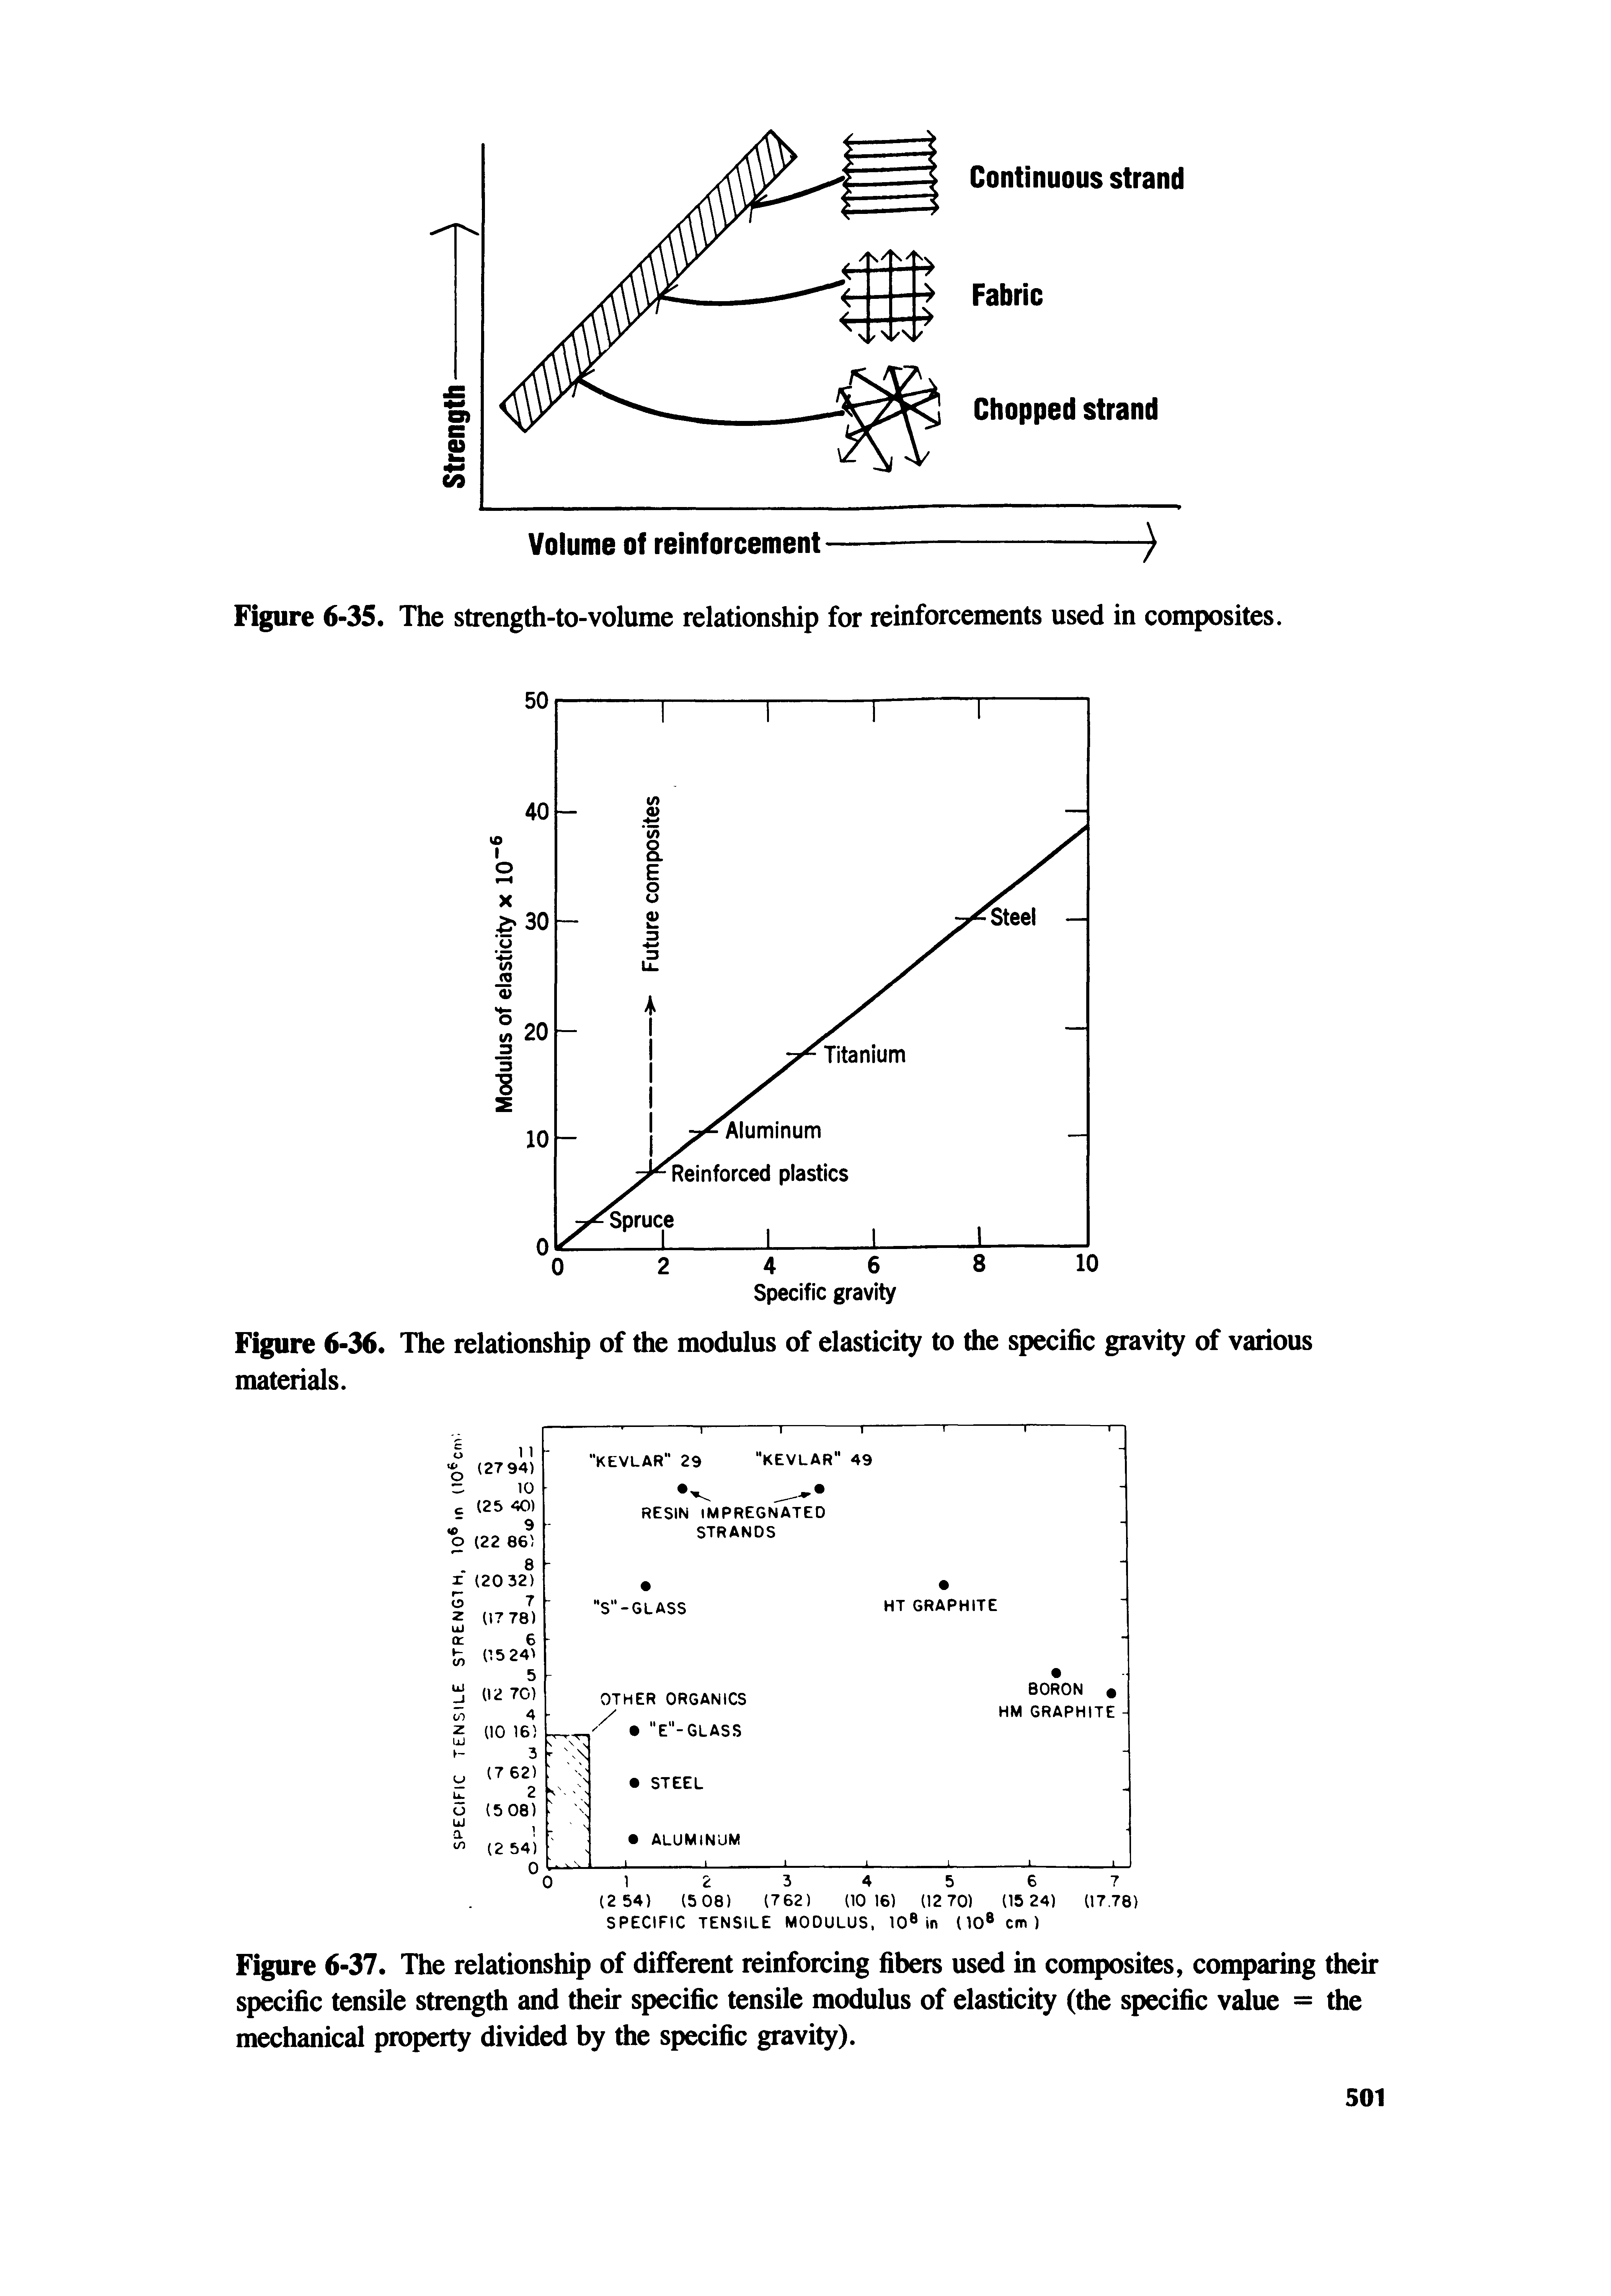 Figure 6-37. The relationship of different reinforcing fibers used in composites, comparing their specific tensile strength and their specific tensile modulus of elasticity (the specific value = the mechanical property divided by the specific gravity).